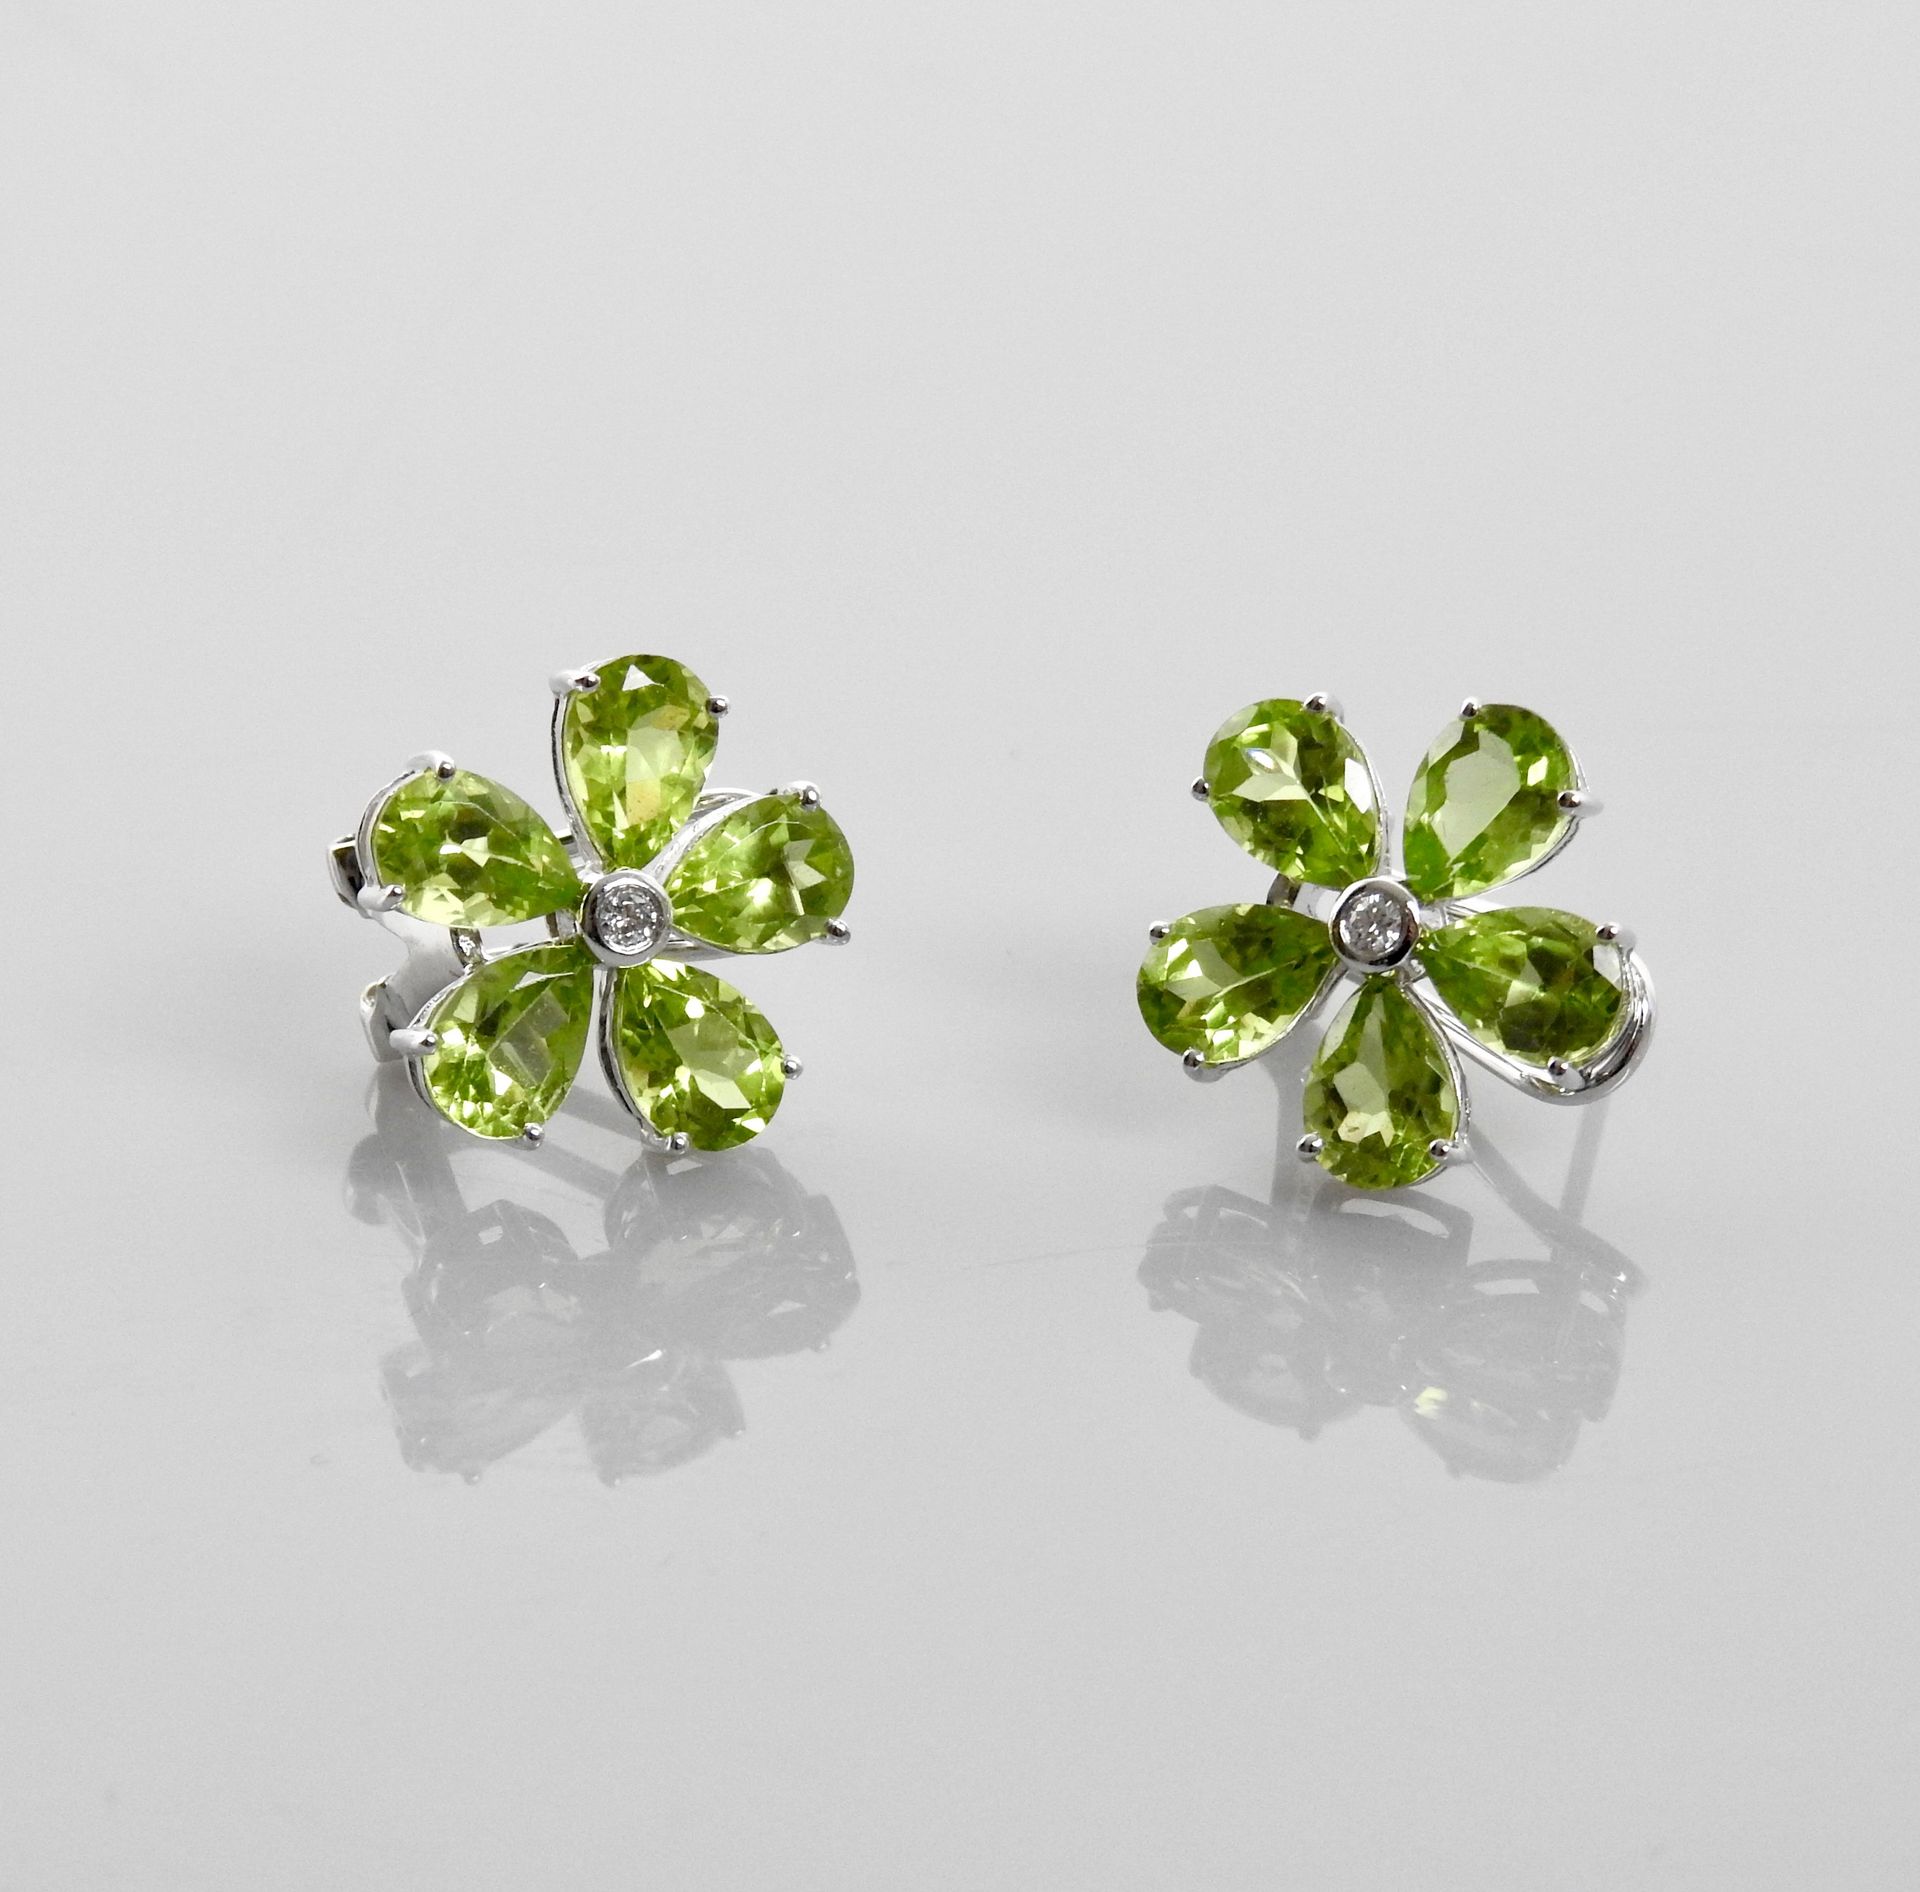 Null Earrings in white gold, 750 MM, each adorned with peridots around a diamond&hellip;